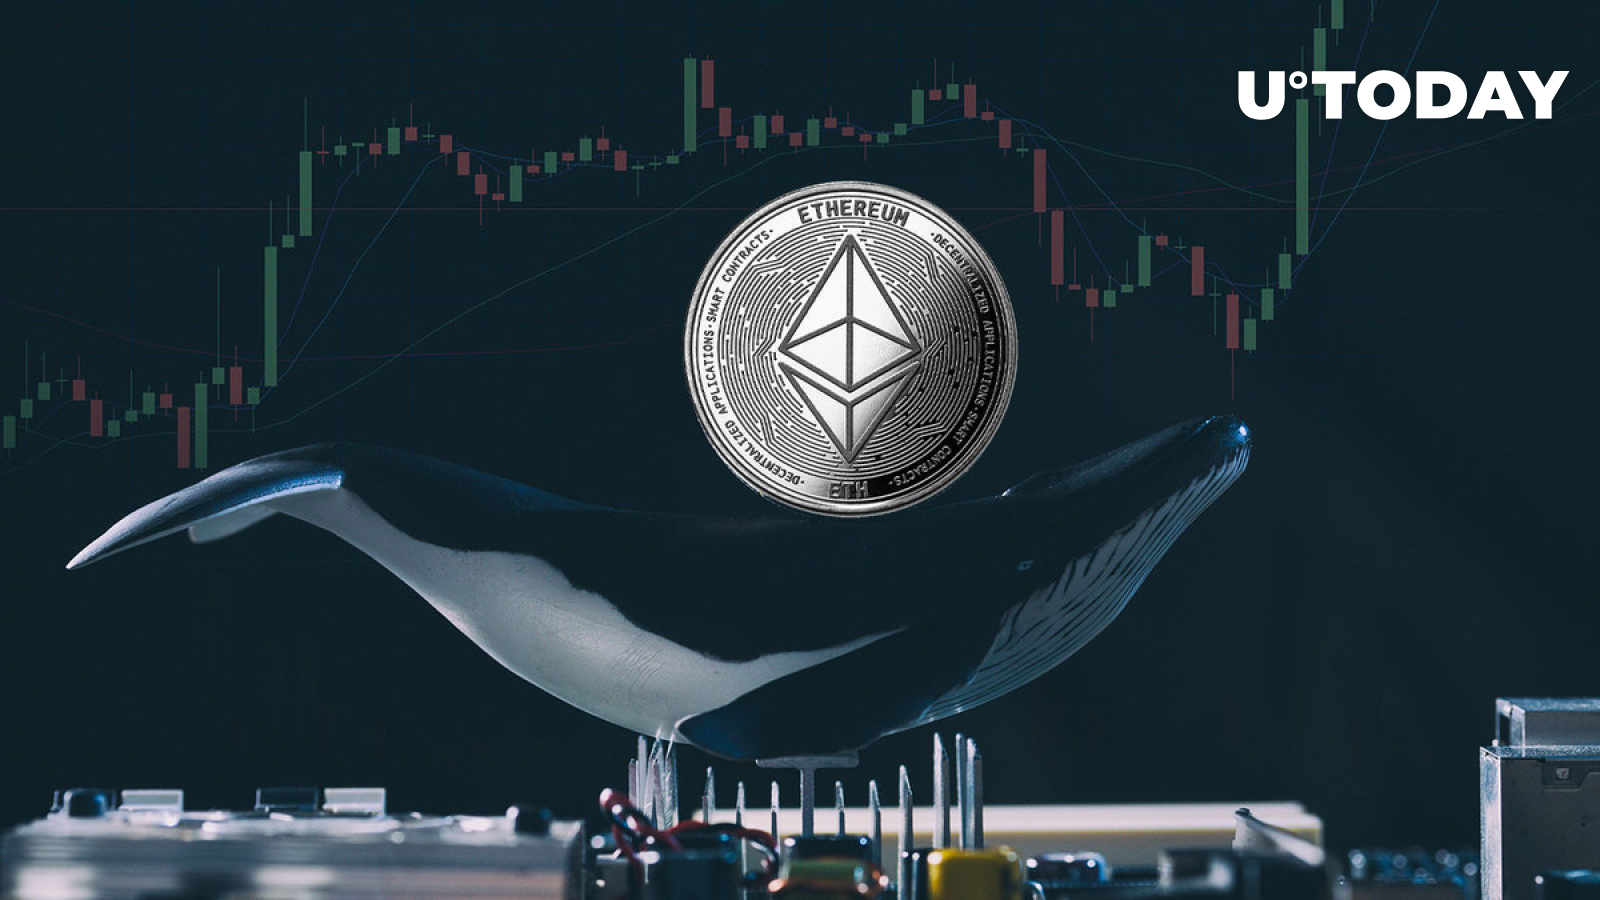 mysterious-investor-scoops-up-usd50-million-in-ethereum-eth-what-s-their-next-move